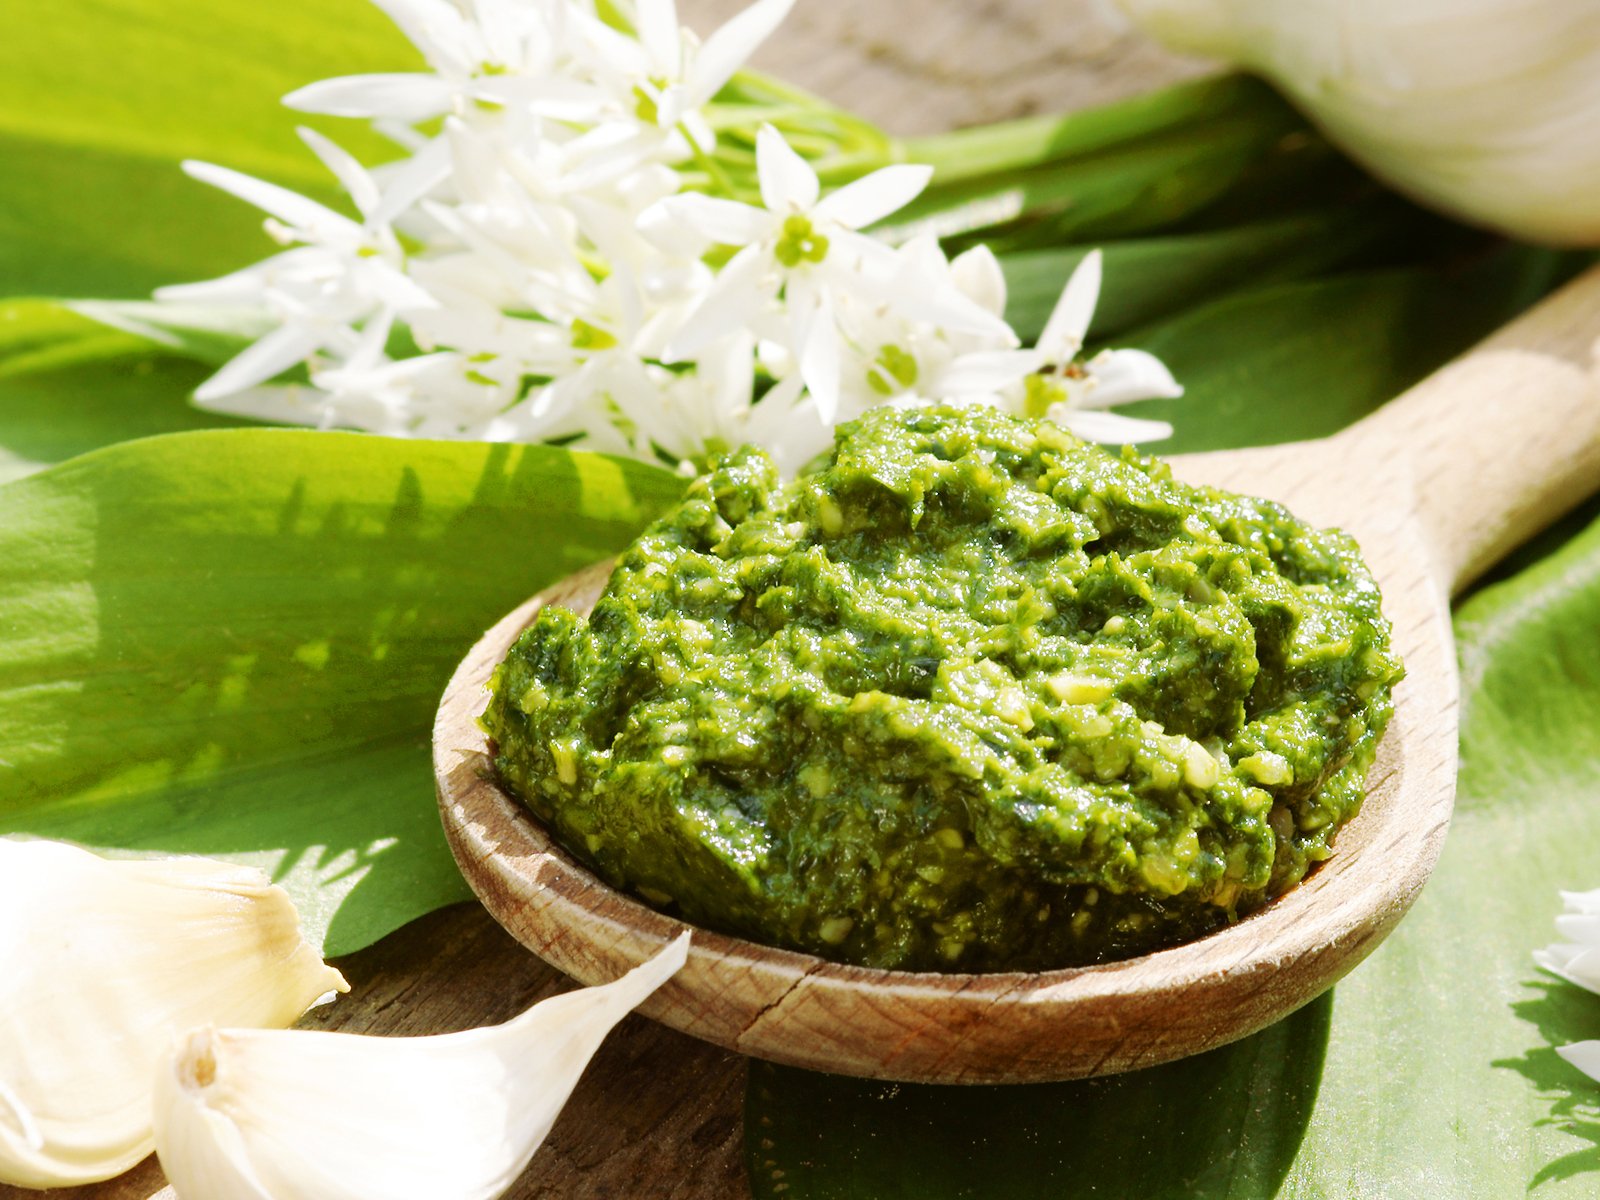 Wild garlic can be used in a myriad of dishes including&nbsp;pesto.